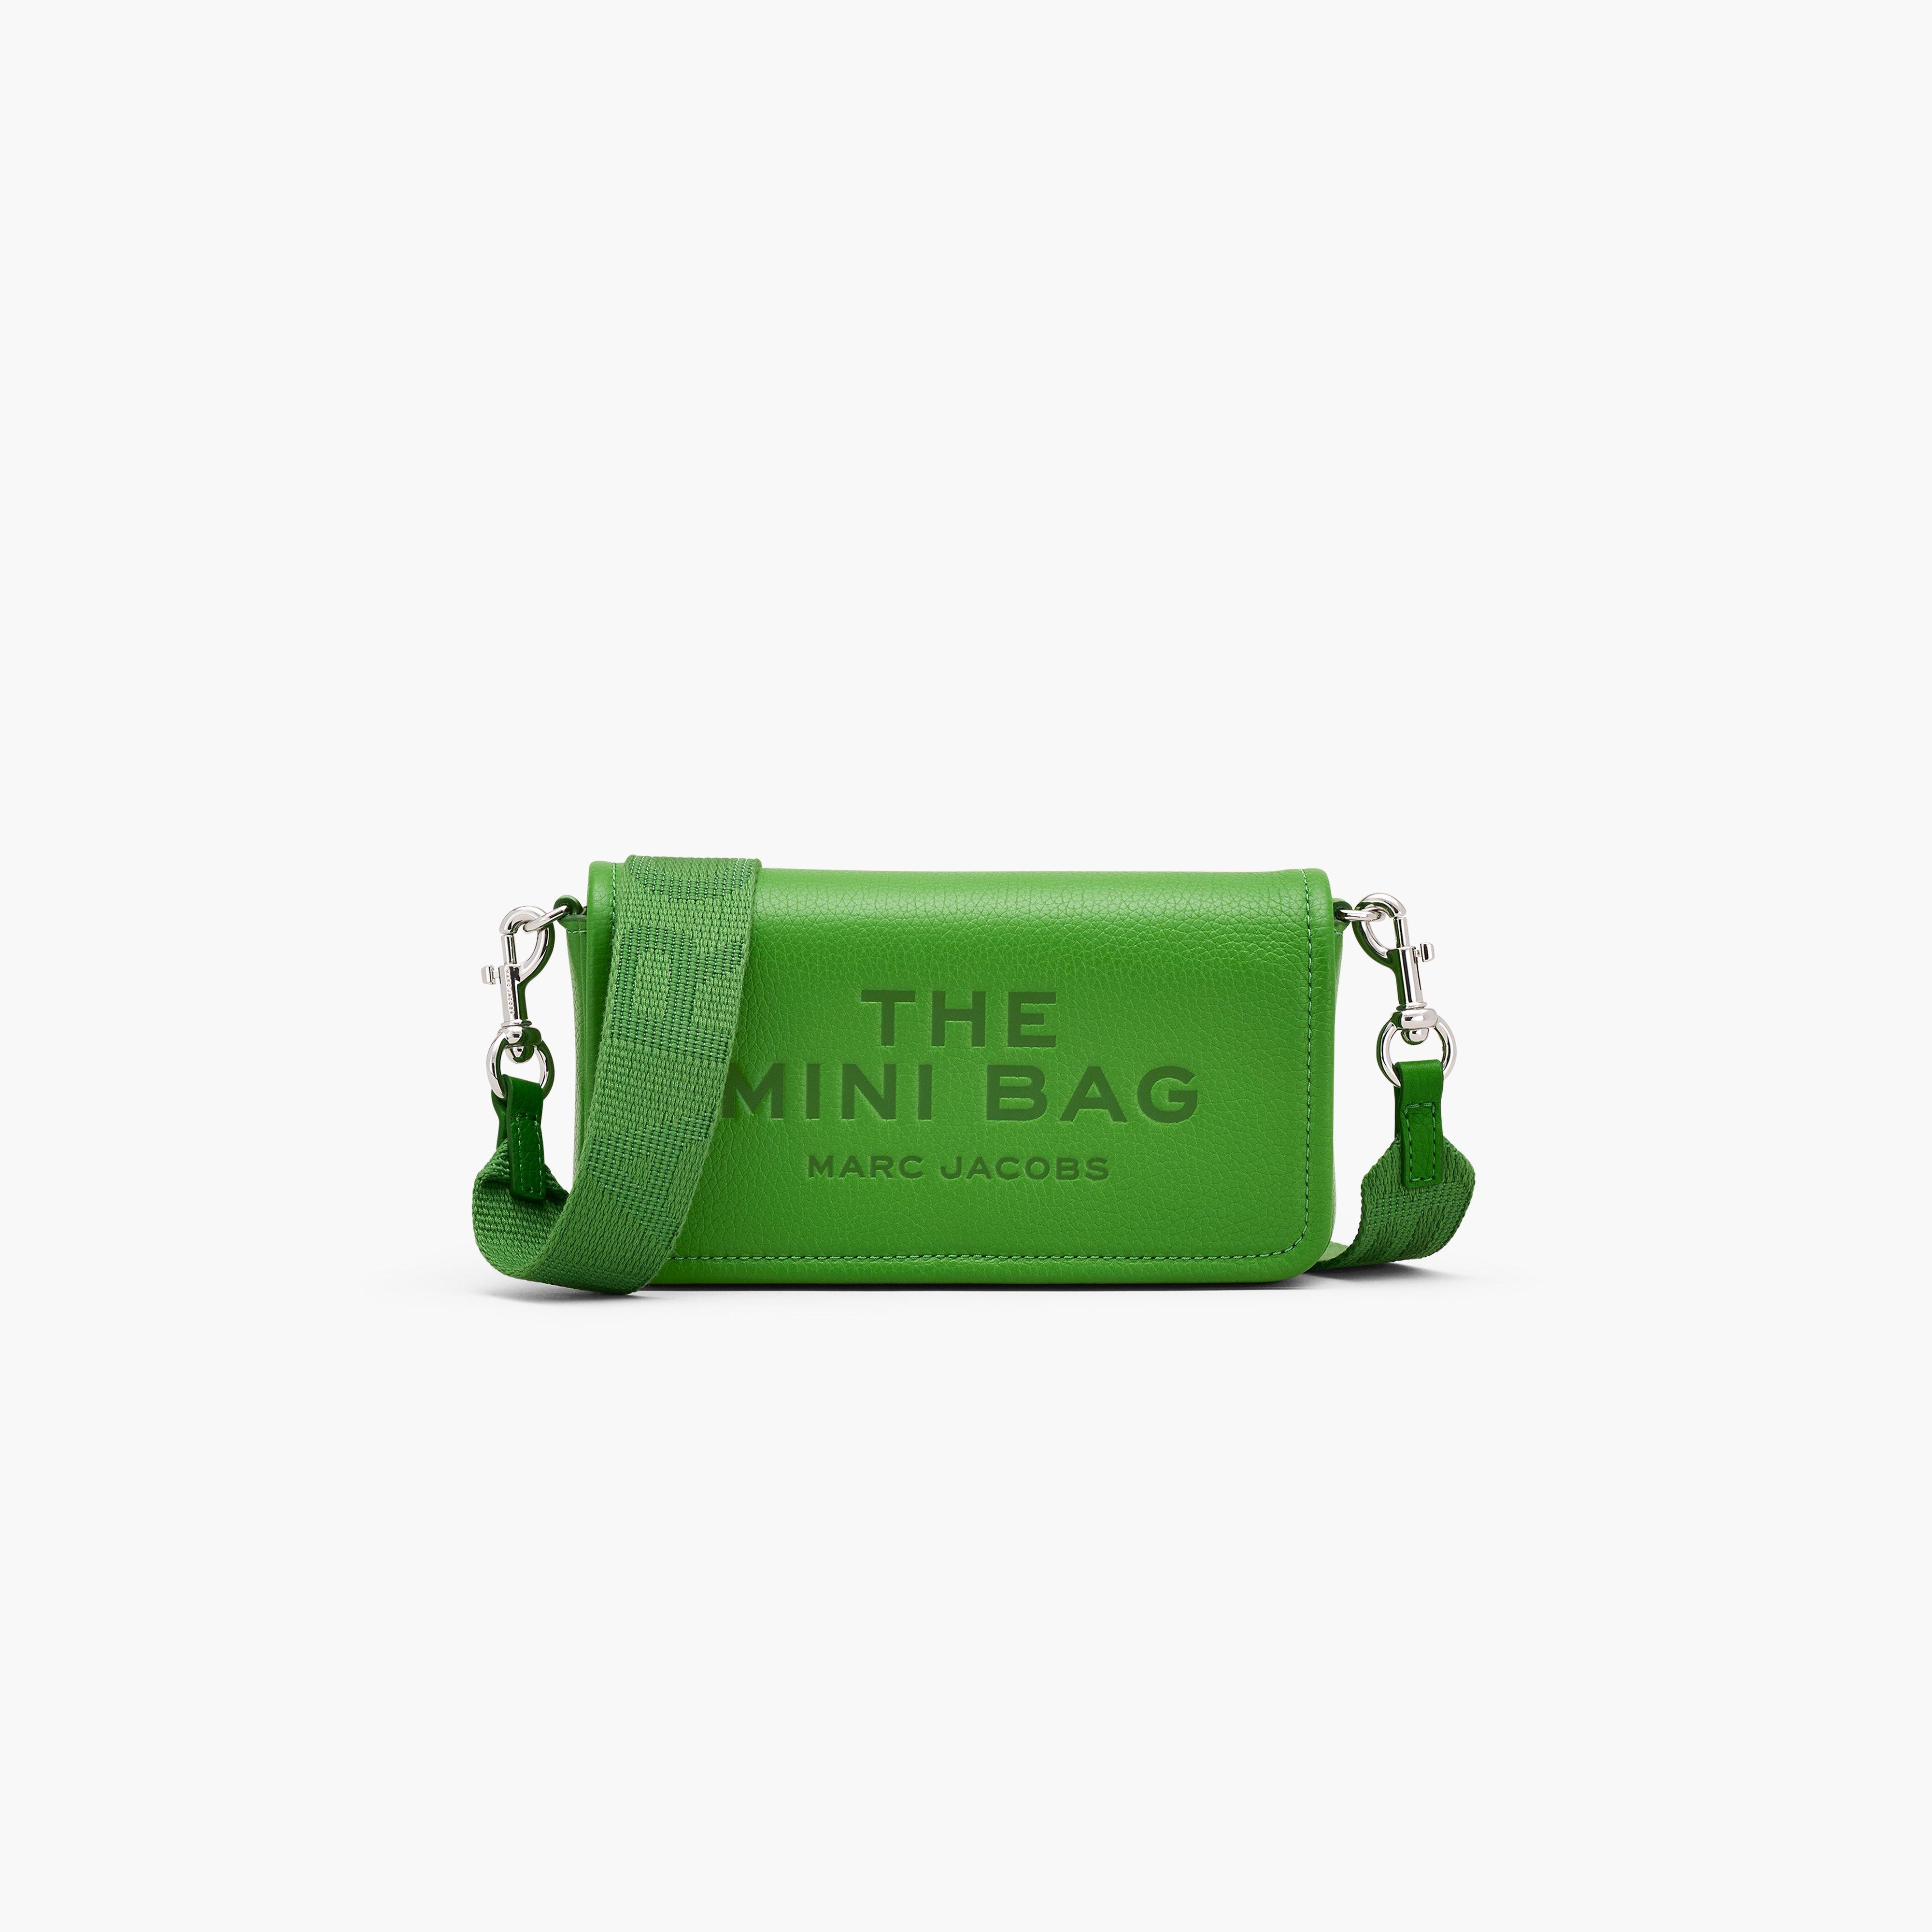 Marc by Marc jacobs The Leather Mini Bag,KIWI